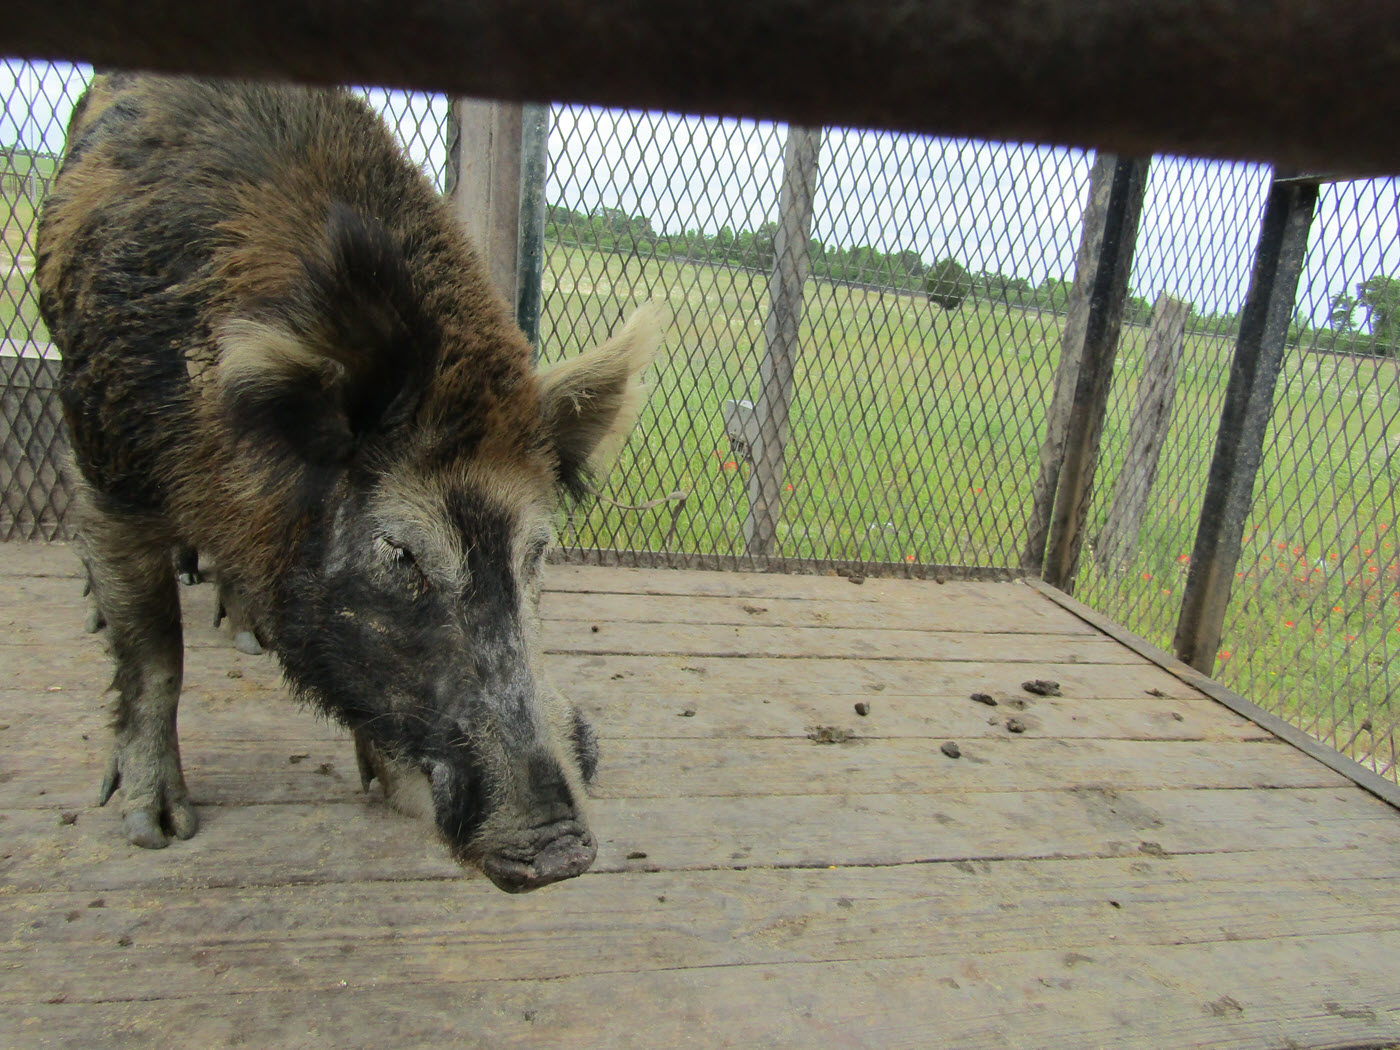 Feral Hog, courtesy of Texas A&M Natural Resources Institute